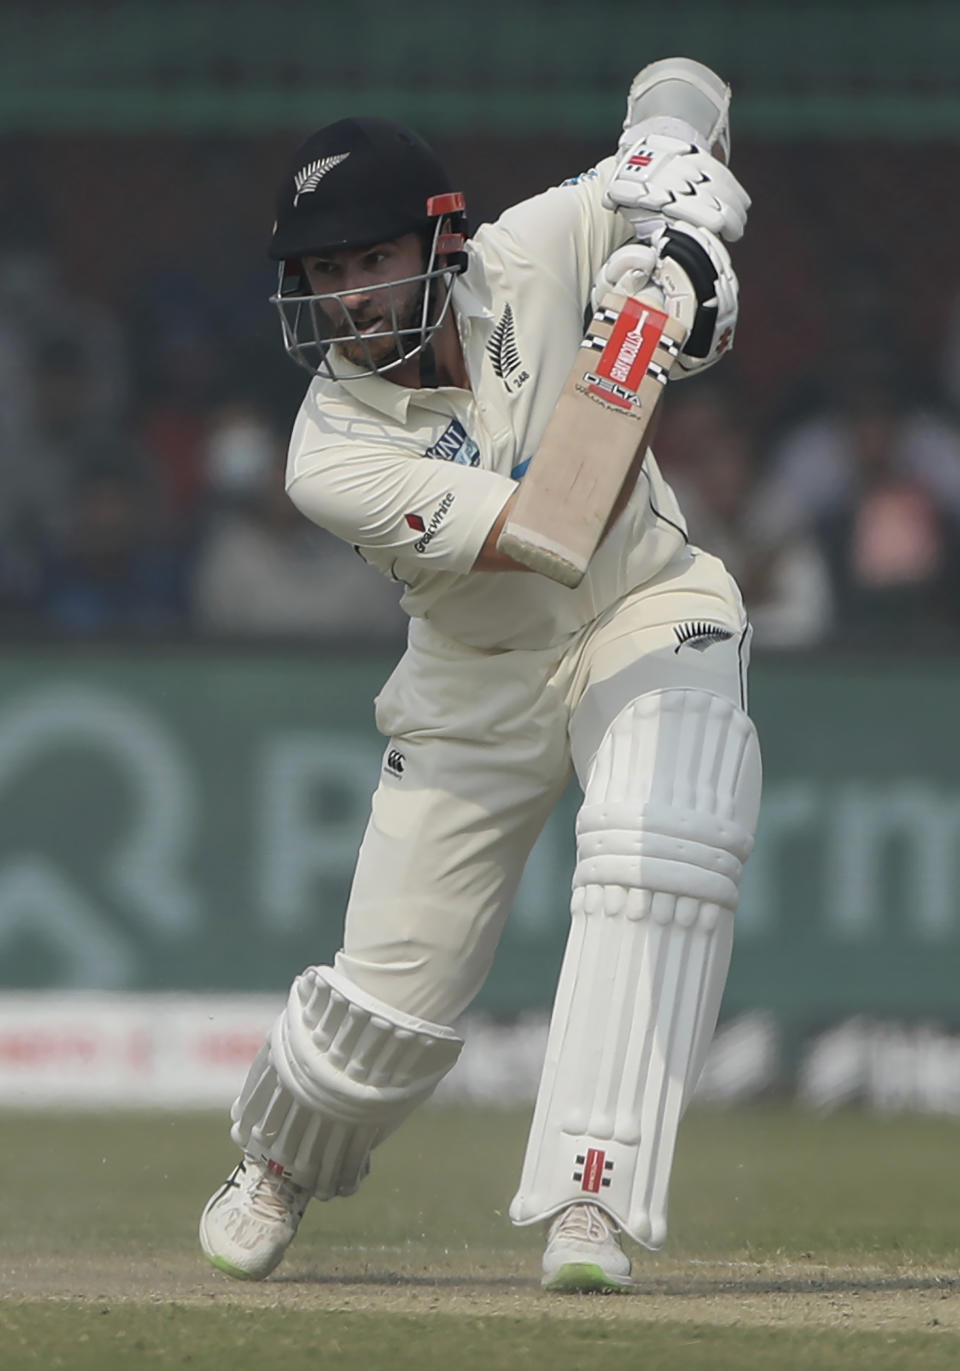 New Zealand's captain Kane Williamson plays a shot during the day three of their first test cricket match with India in Kanpur, India, Saturday, Nov. 27, 2021. (AP Photo/Altaf Qadri)